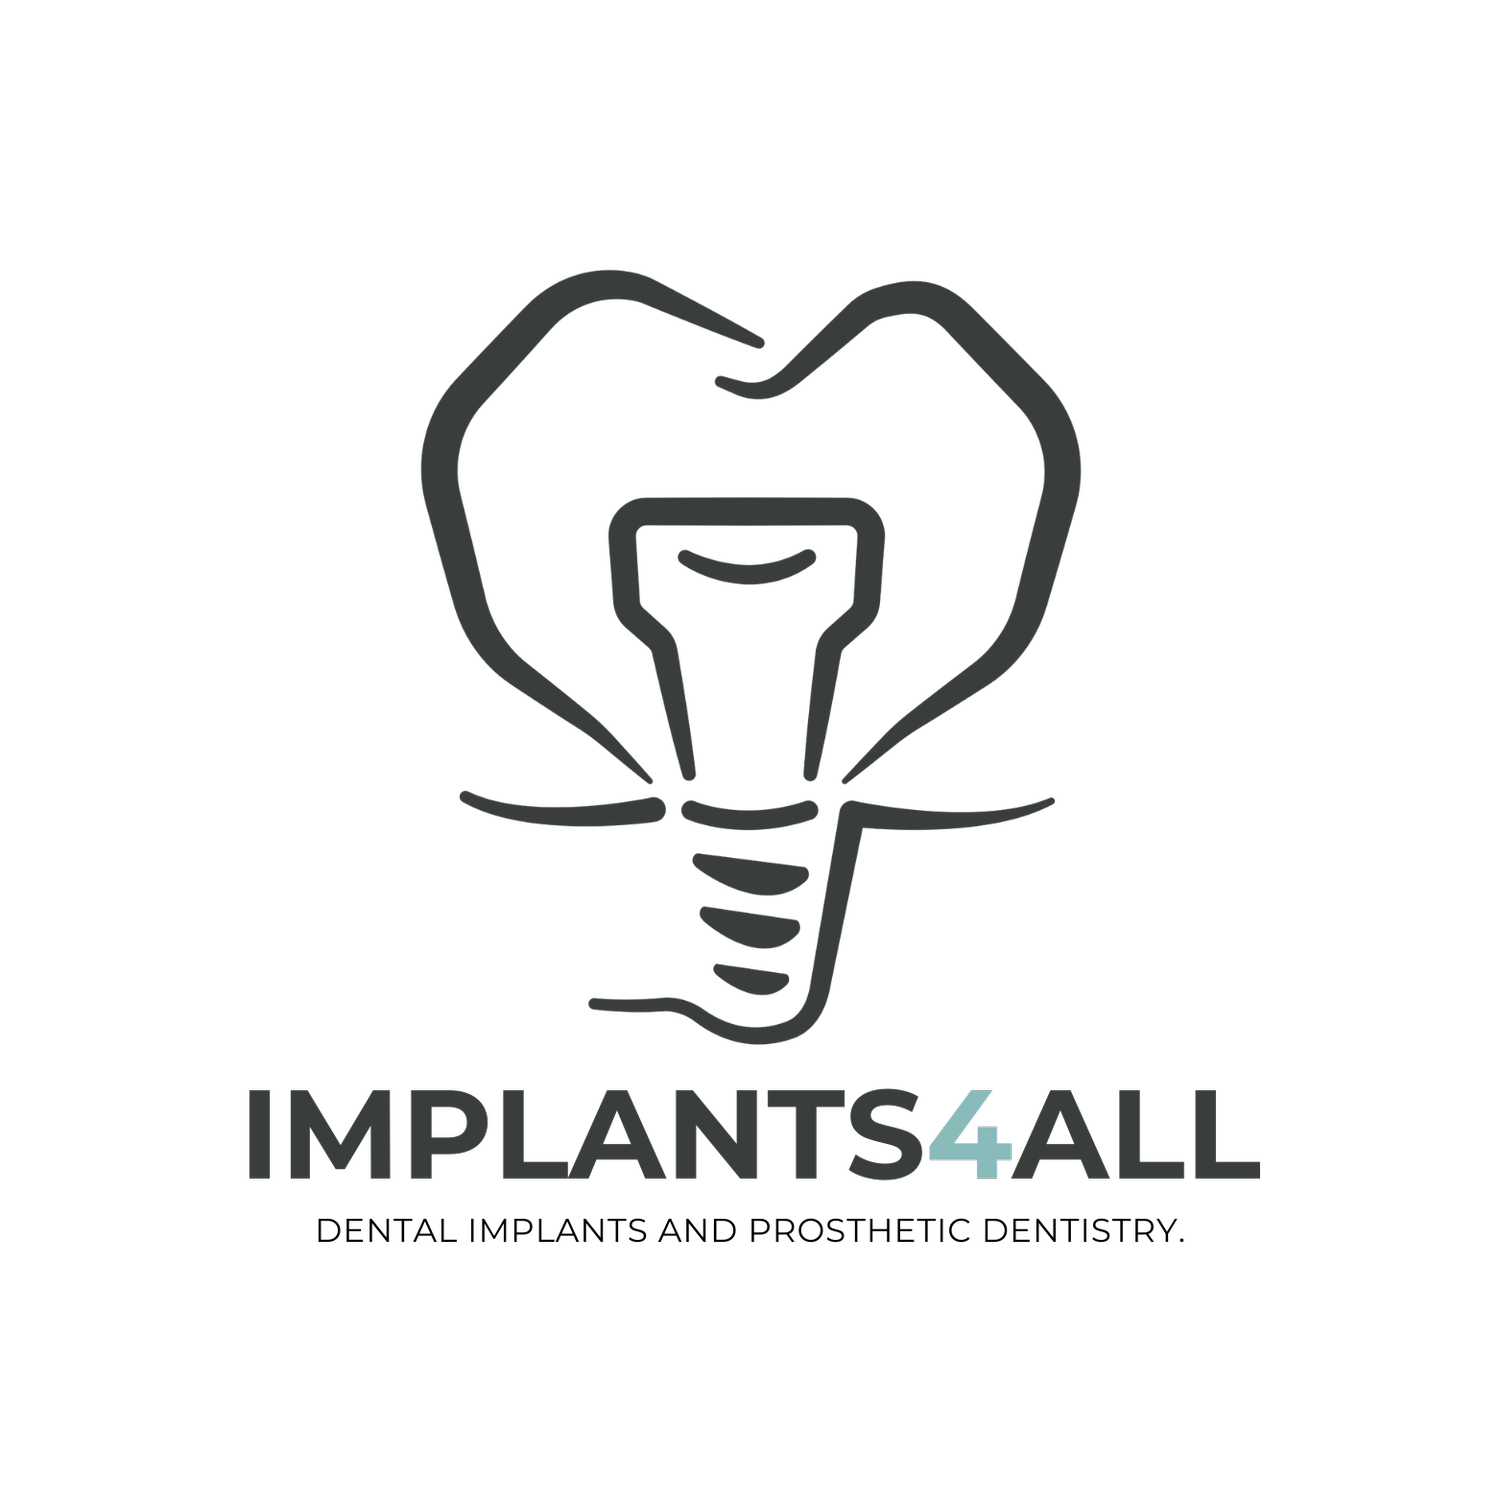 Implants4all official site 